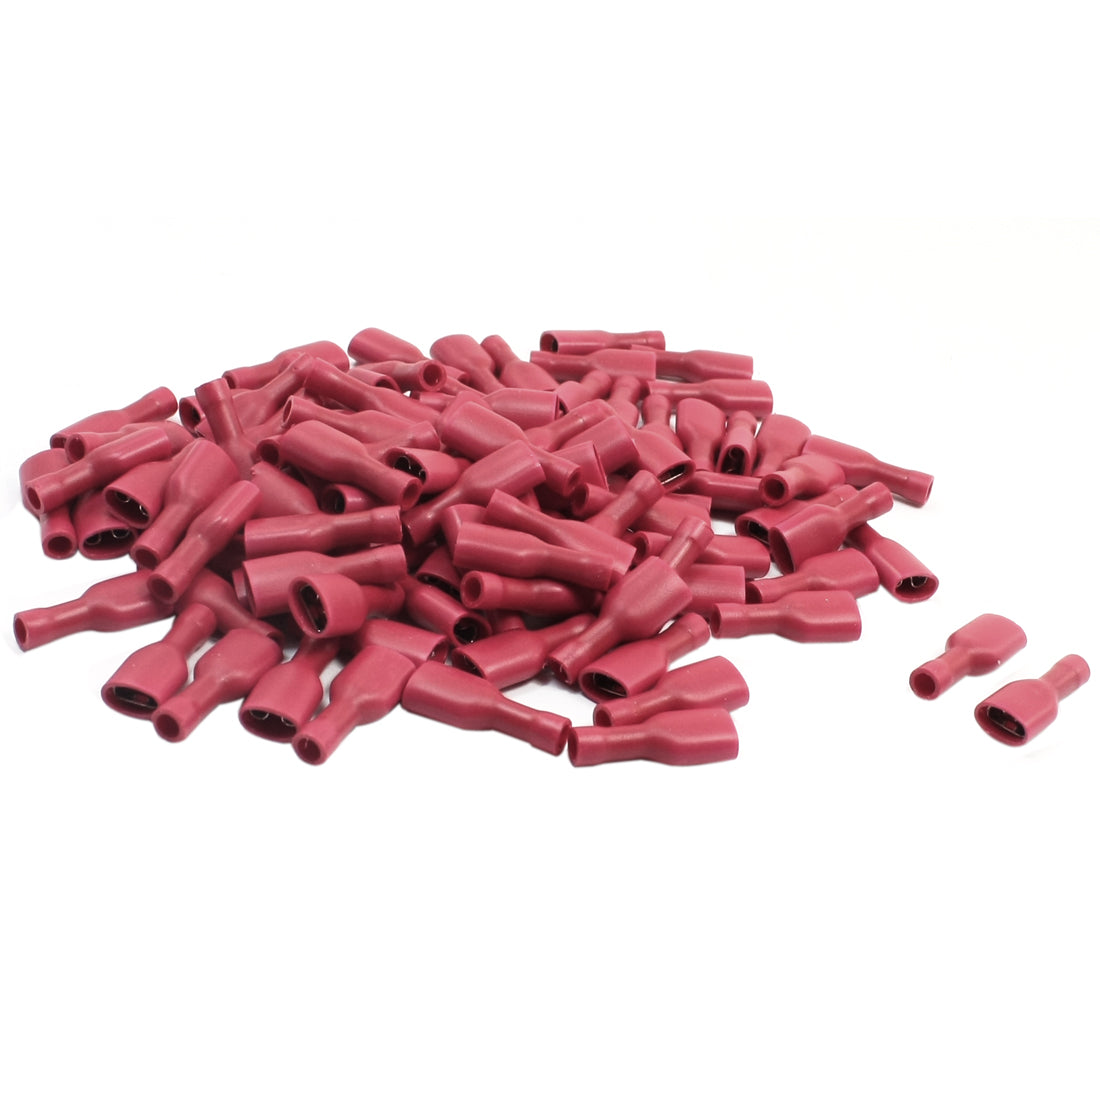 uxcell Uxcell 100 Pcs FDFD1-250 Red Plastic Covered Full Insulate Female Spade Crimp Connecting Terminal 22-16AWG